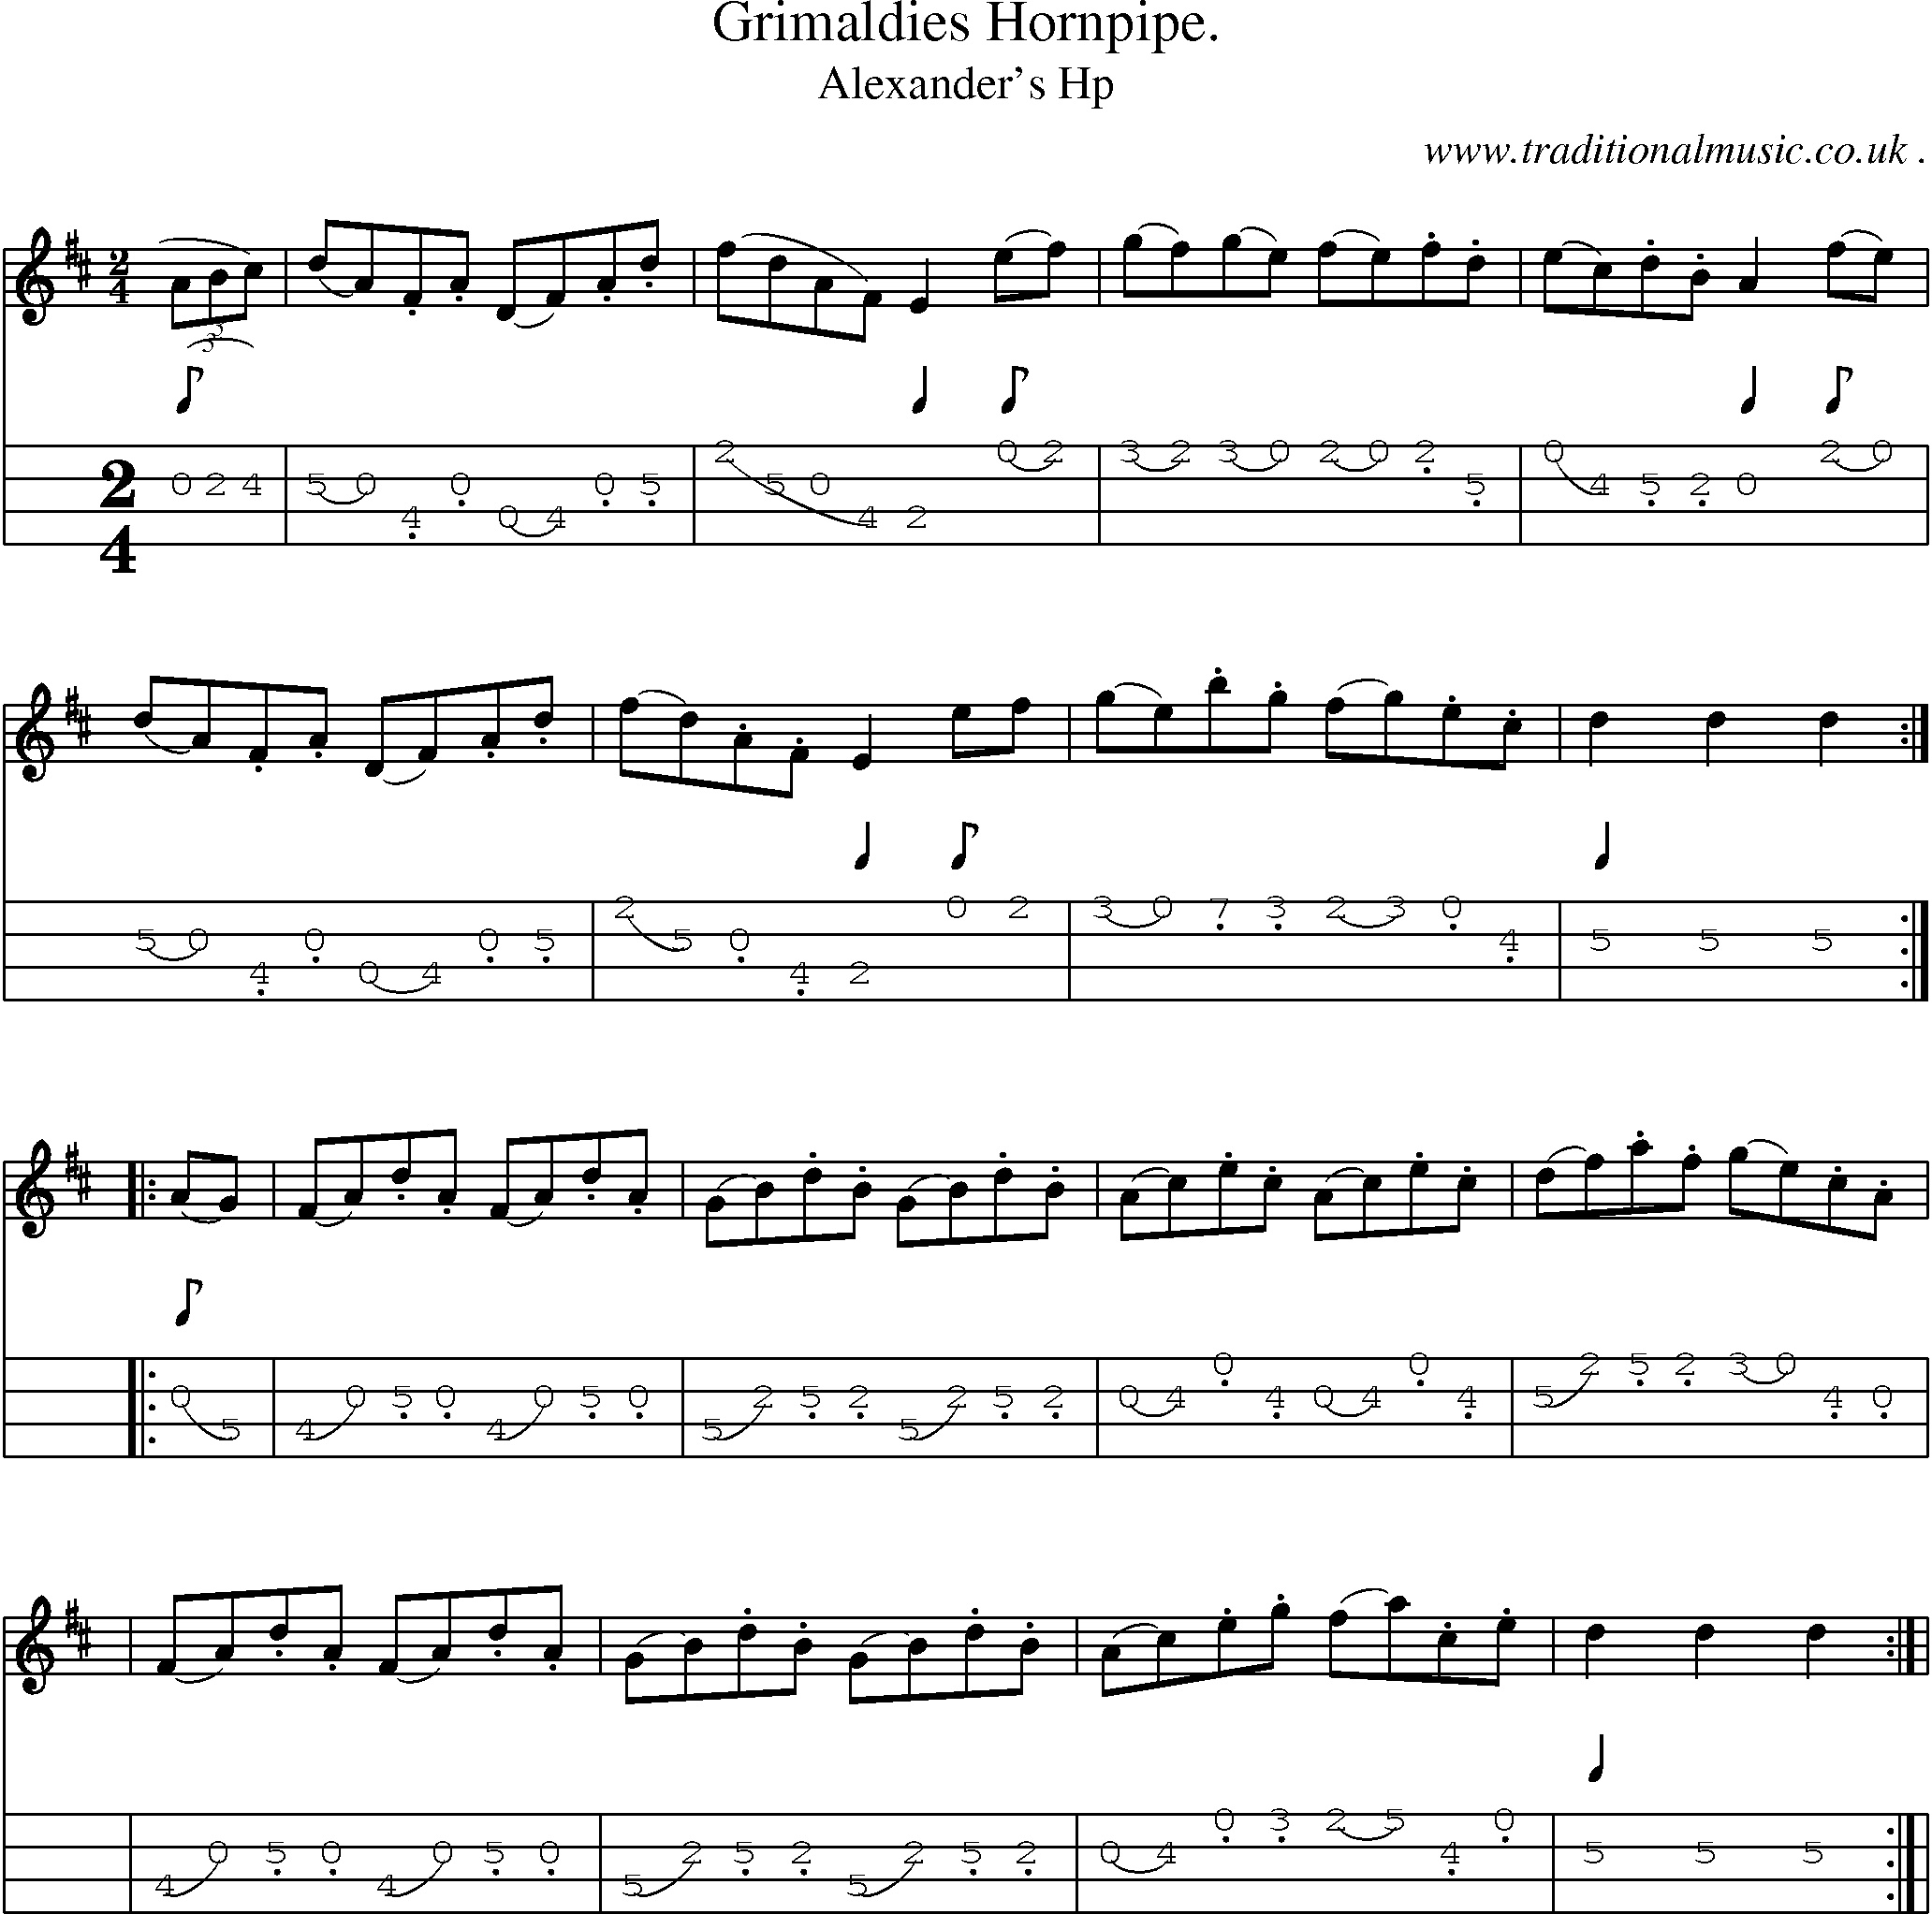 Sheet-Music and Mandolin Tabs for Grimaldies Hornpipe